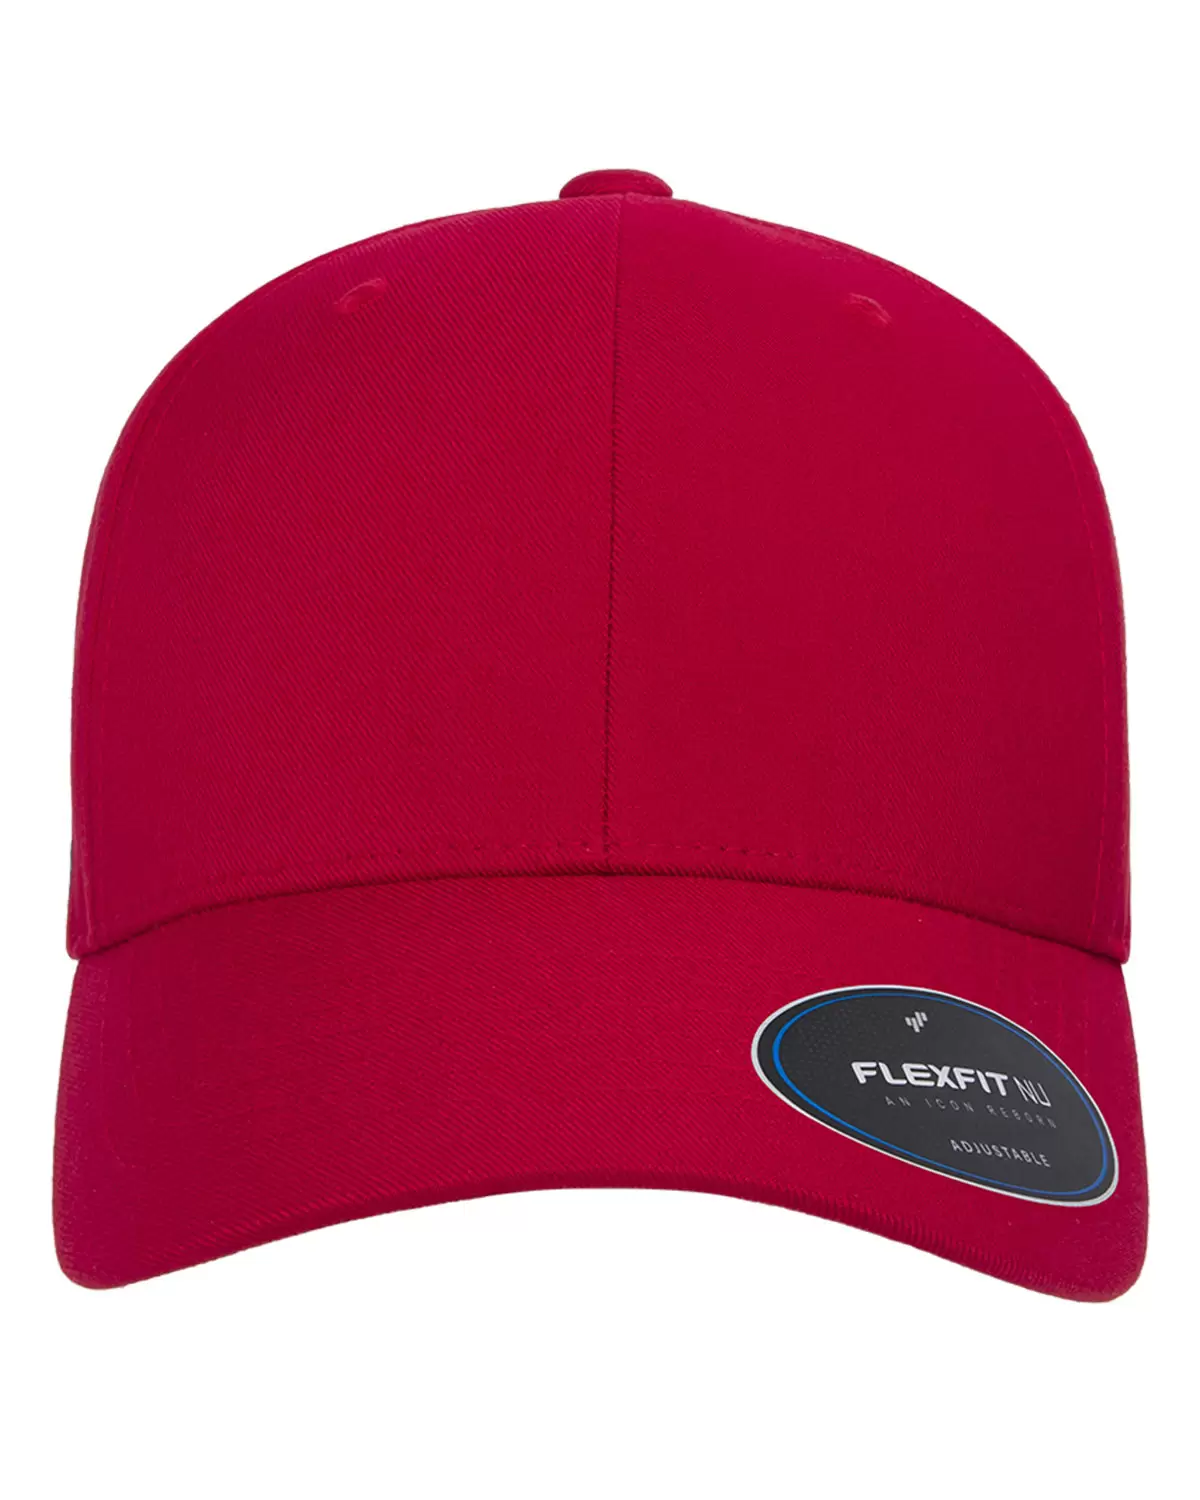 Yupoong-Flex Fit 6110NU NU Adjustable Cap - From